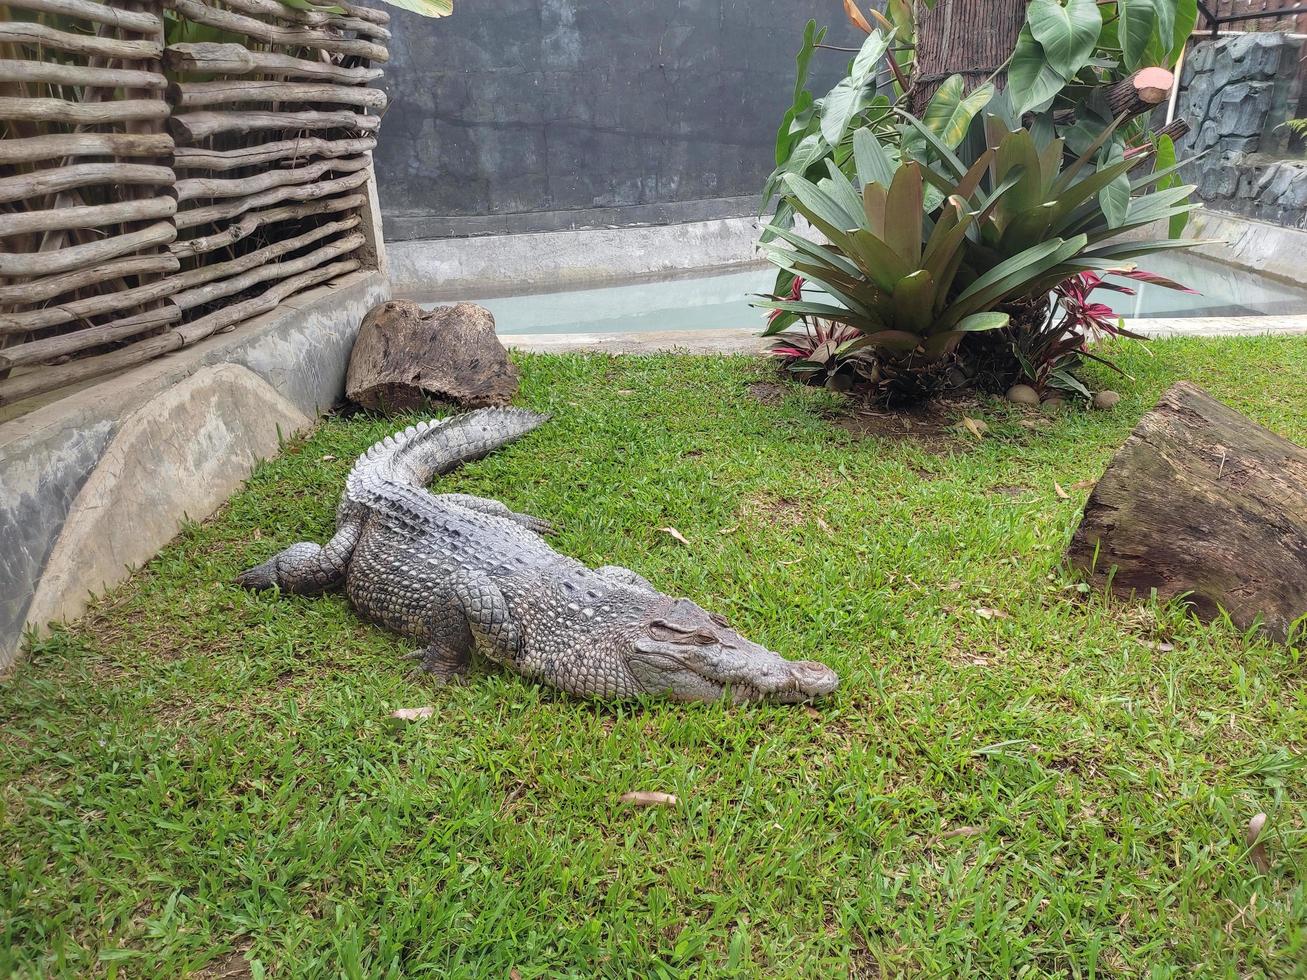 an alligator in a zoo enclosure photo